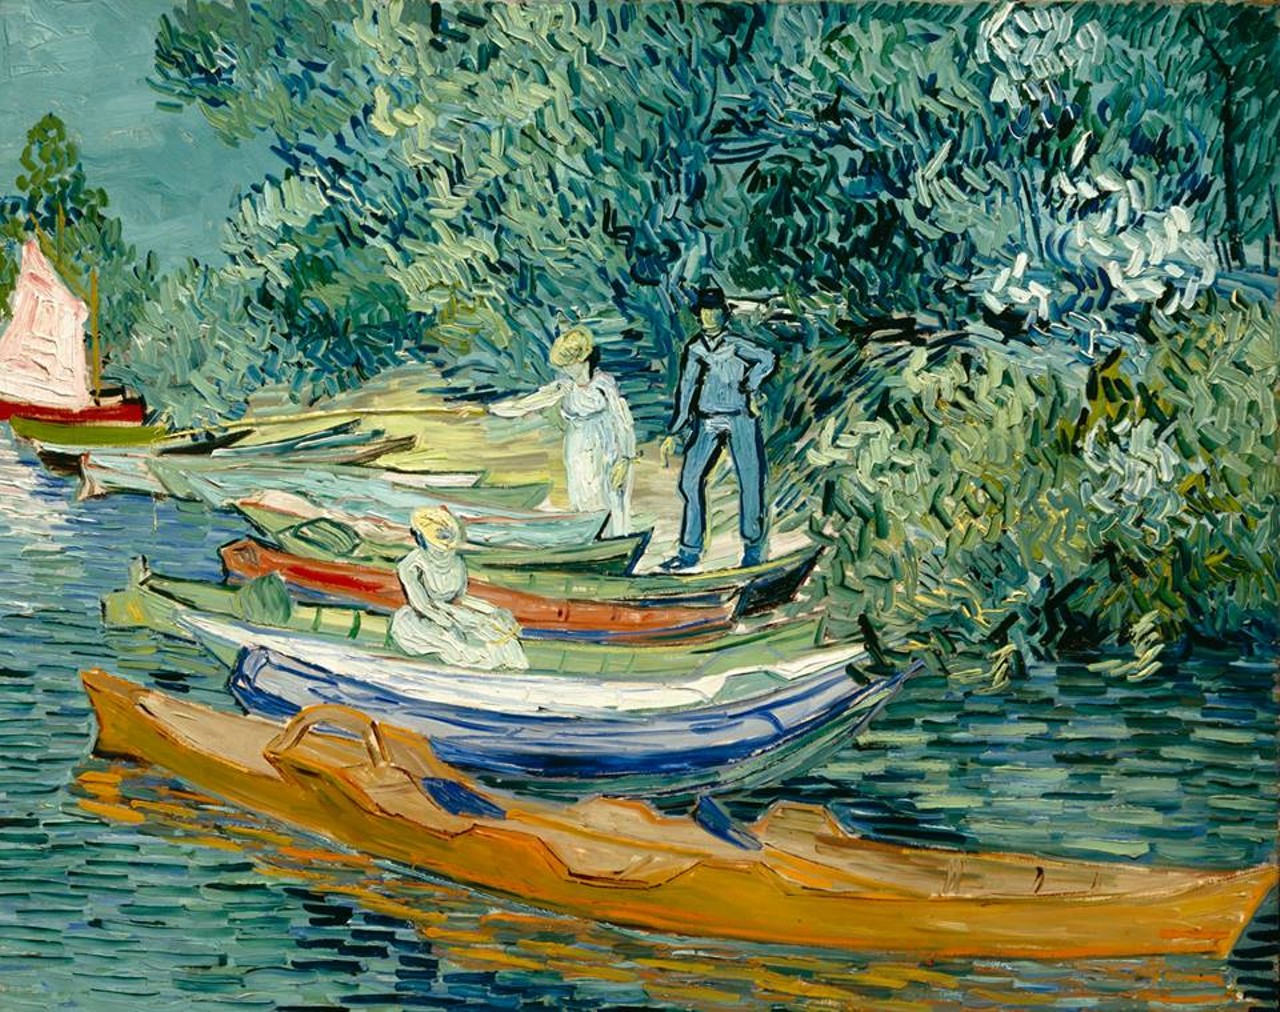 The above painting is "Bankof the Oise at Auvers" by Vincent Van Gogh, one of several of his works on display at the DIA. The museum is always cycling in new, exciting exhibitions so keep an eye out over the summer.
Photo via Detroit Institute of Arts Facebook page